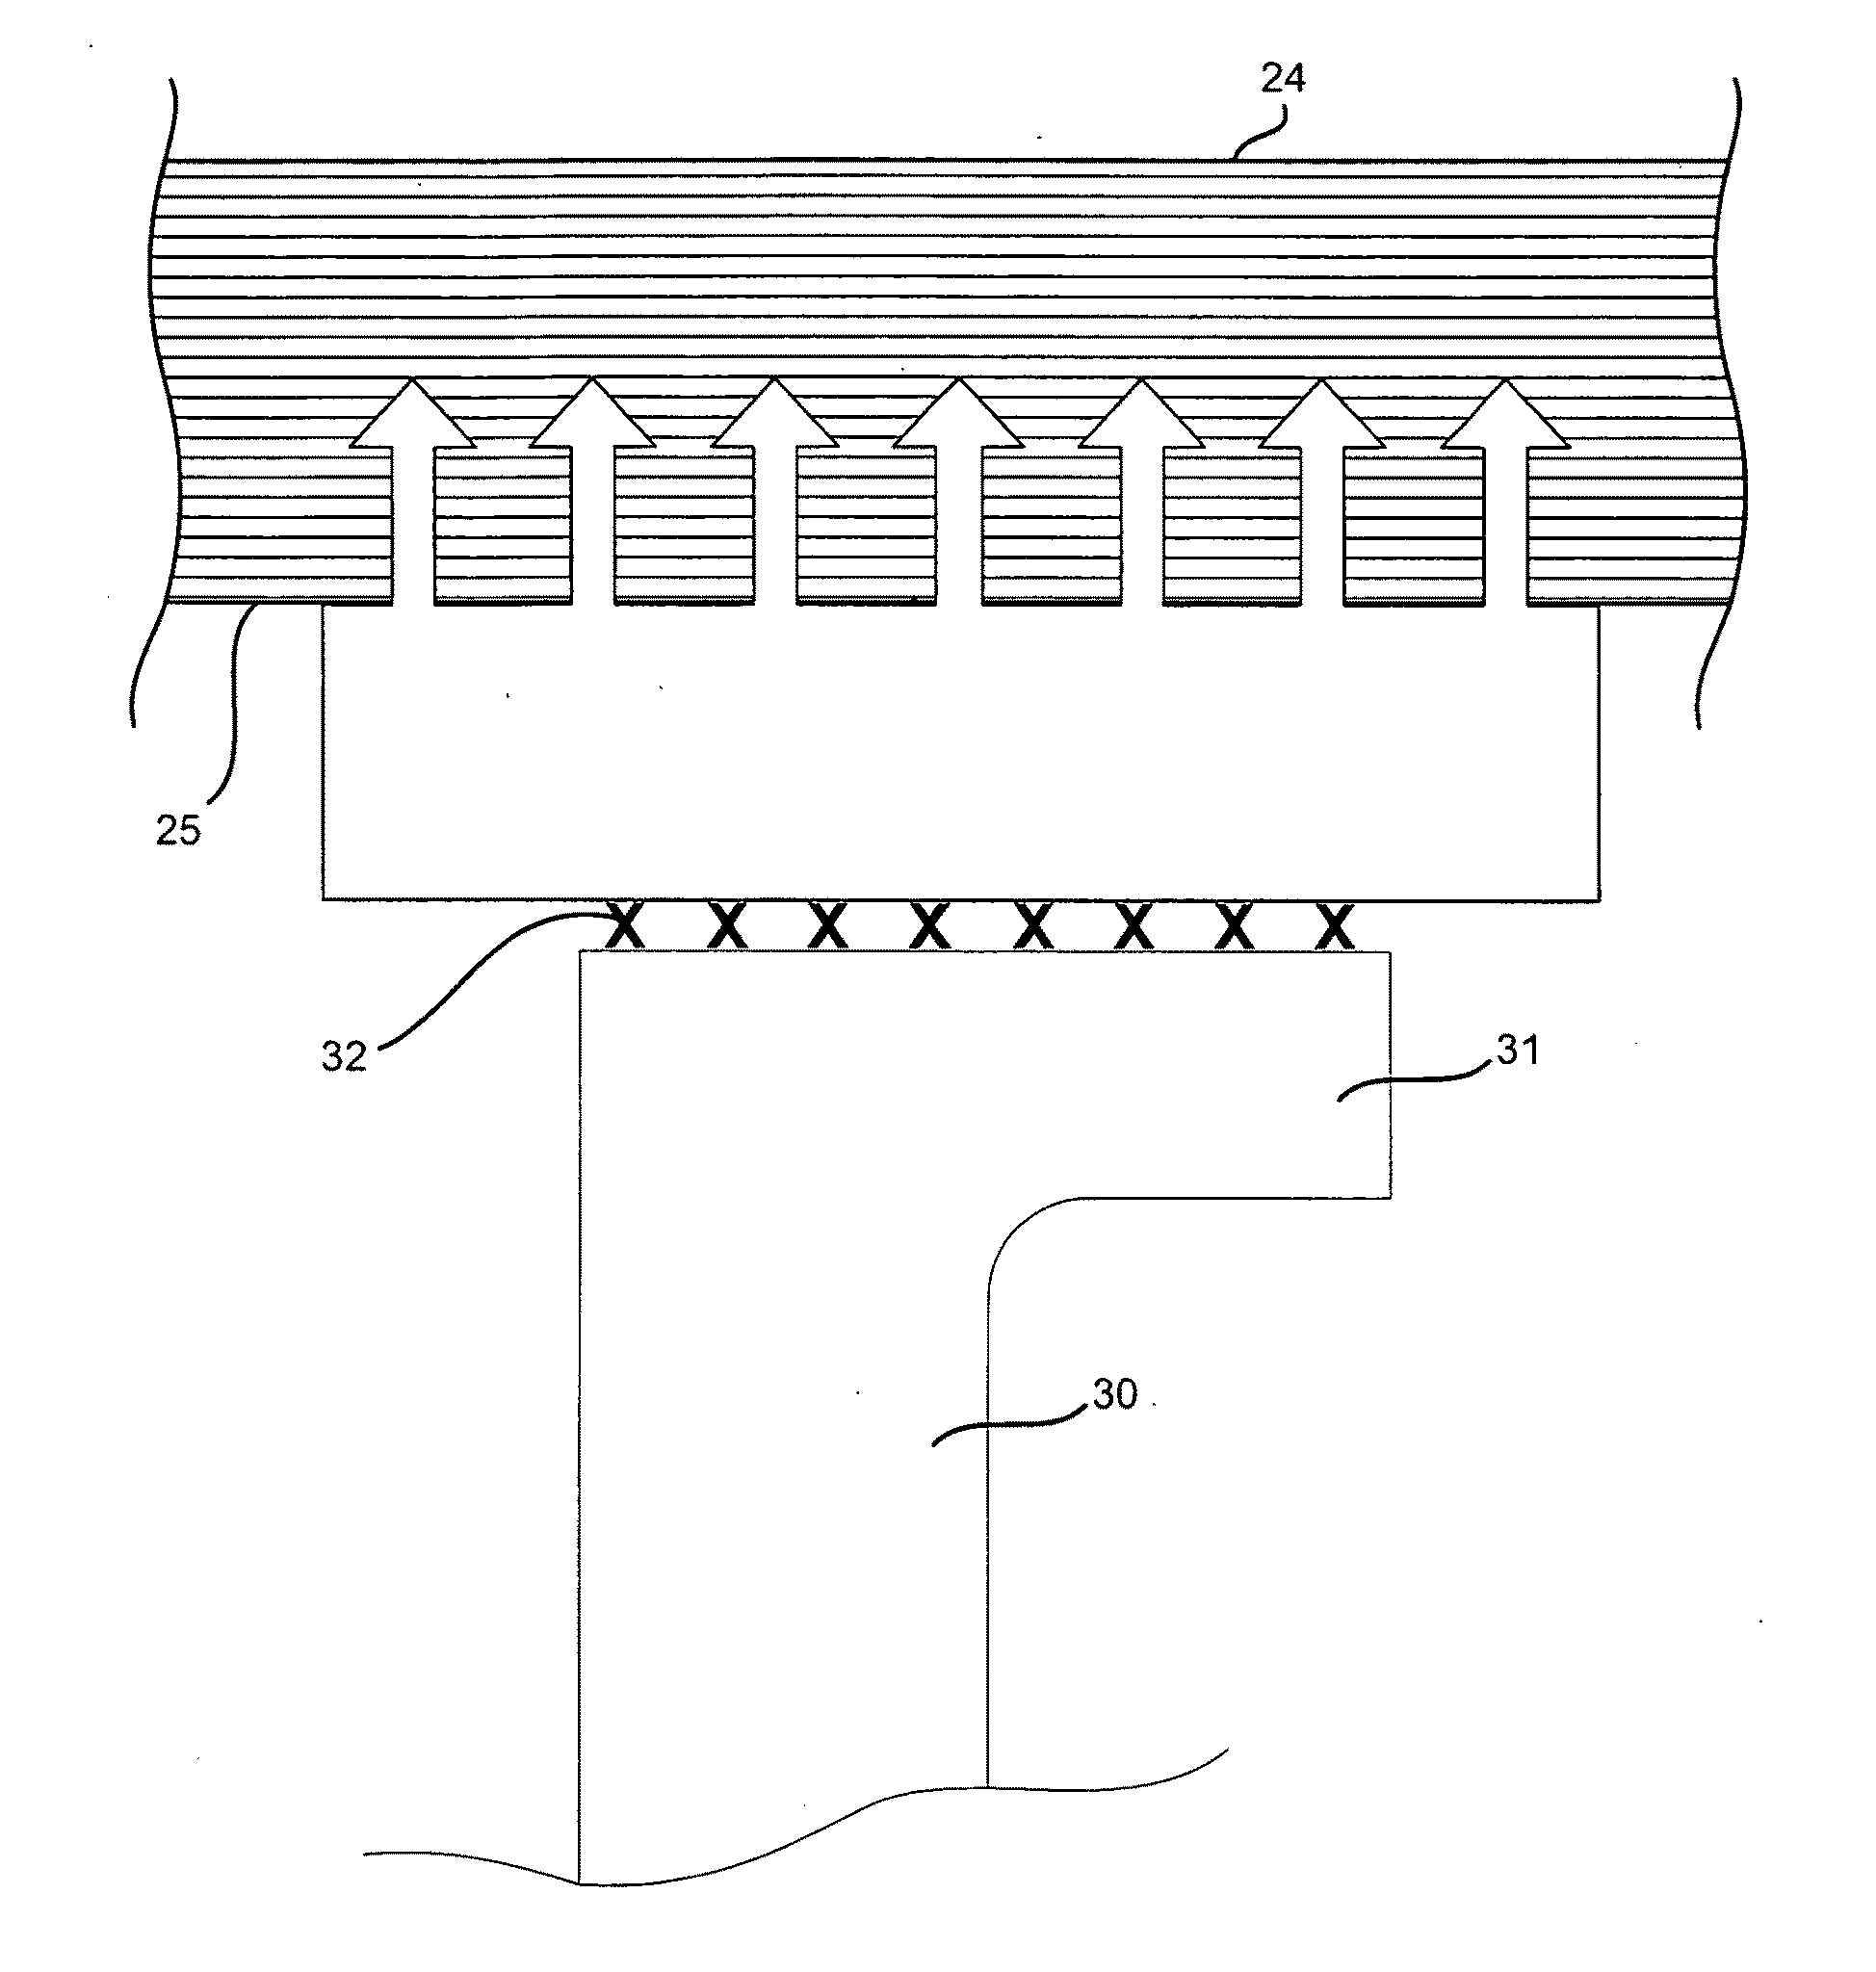 Method of forming a joint